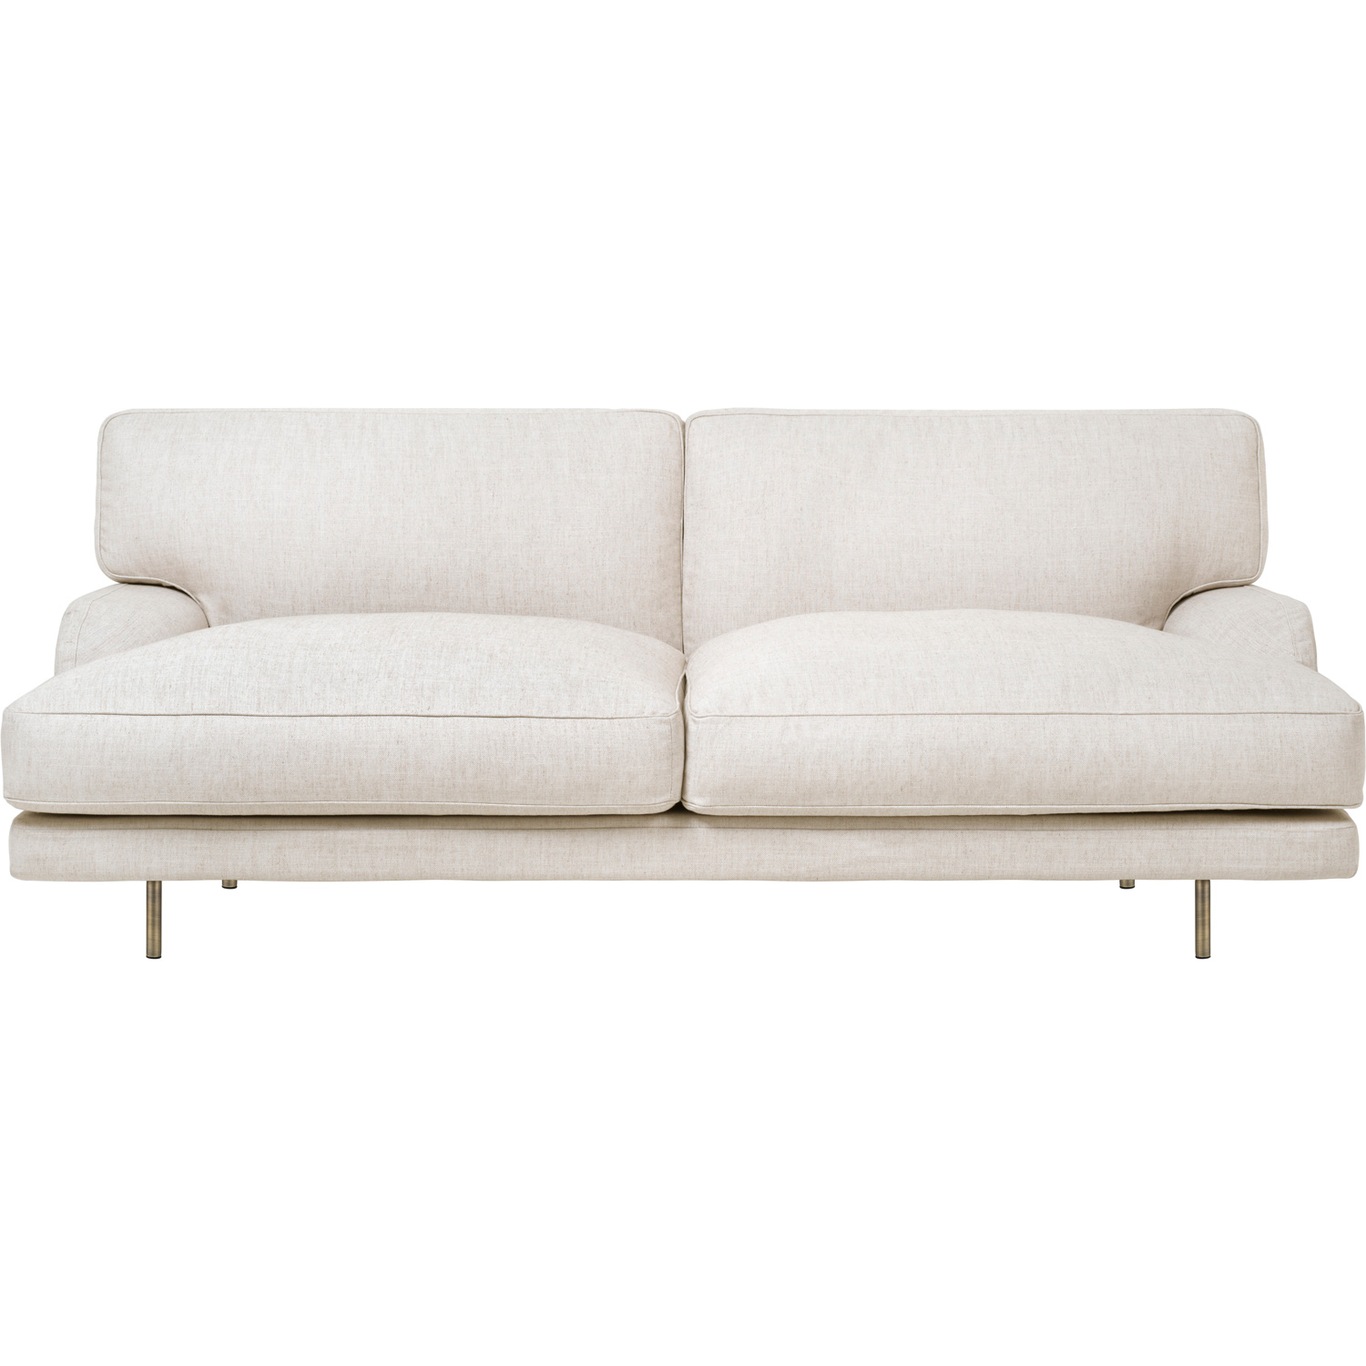 Flaneur Sofa LC 2,5-Seater, Legs Brass / Hot Madison 419 Off White